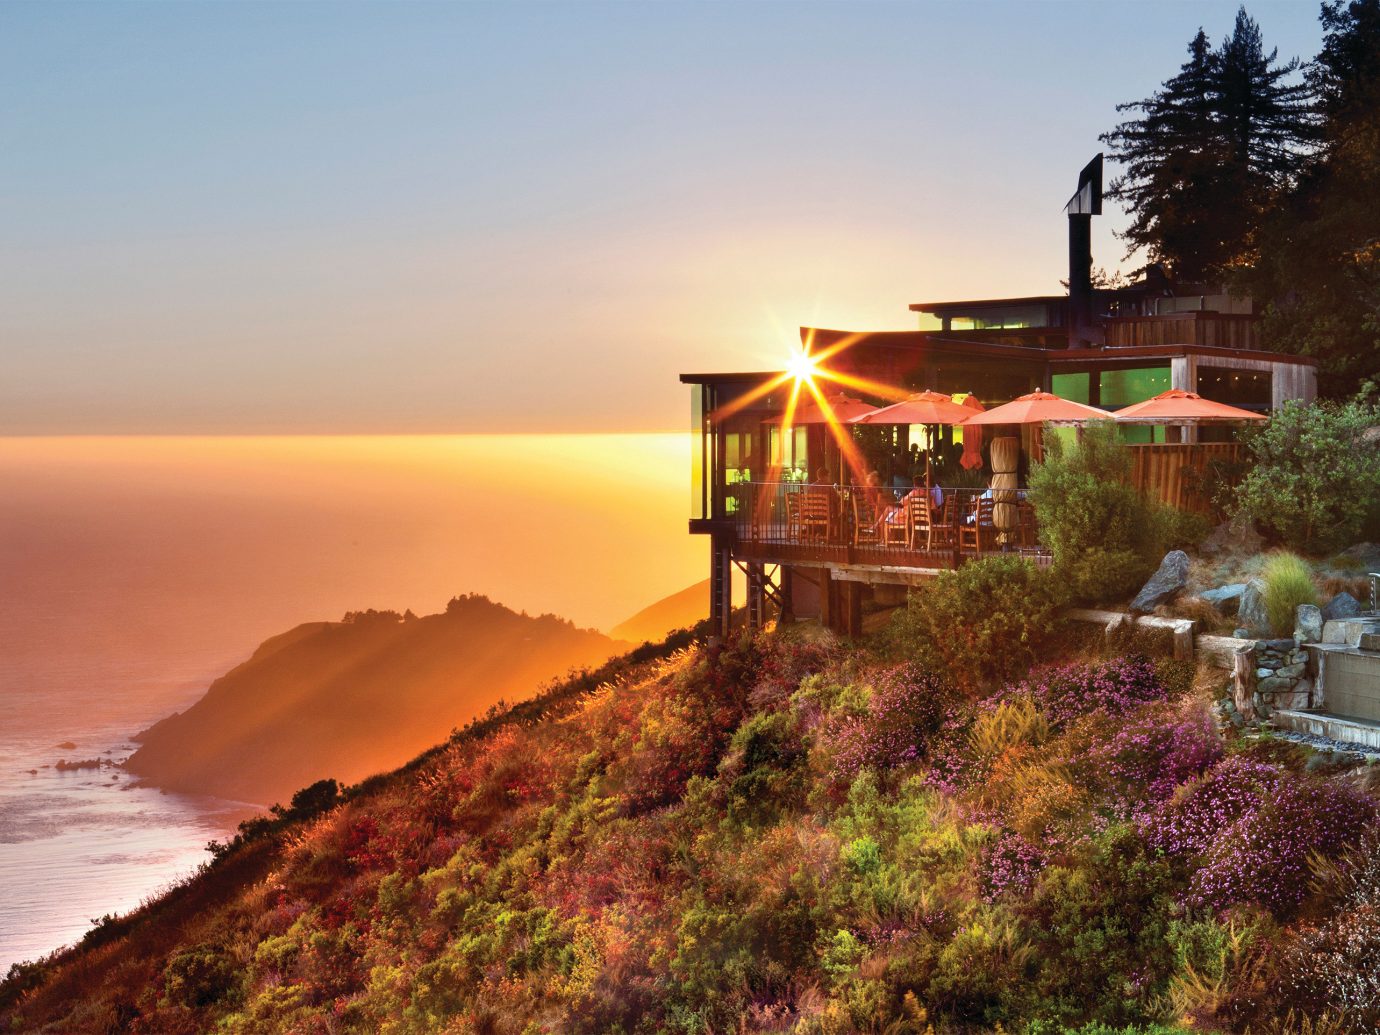 Exterior view during sunset at Sierra Mar, Big Sur, CA